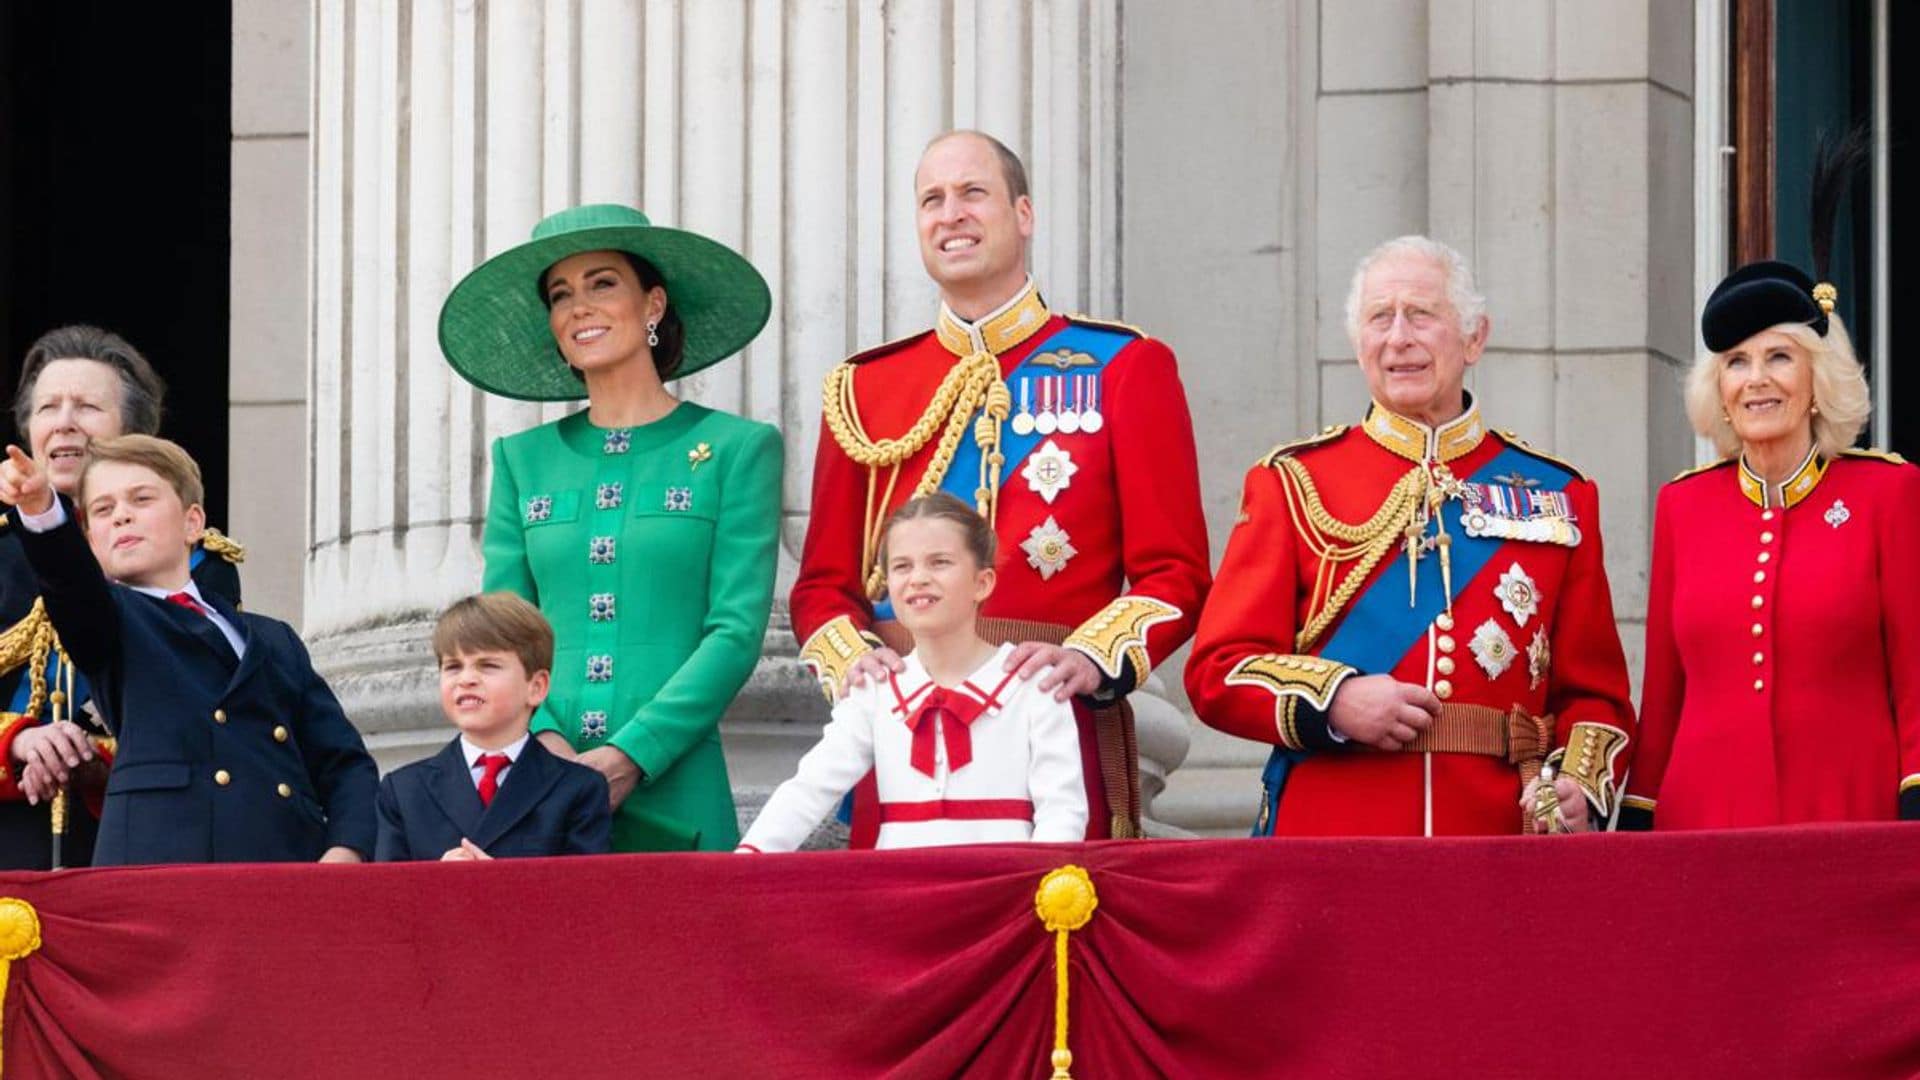 Change to this year’s Trooping the Colour revealed